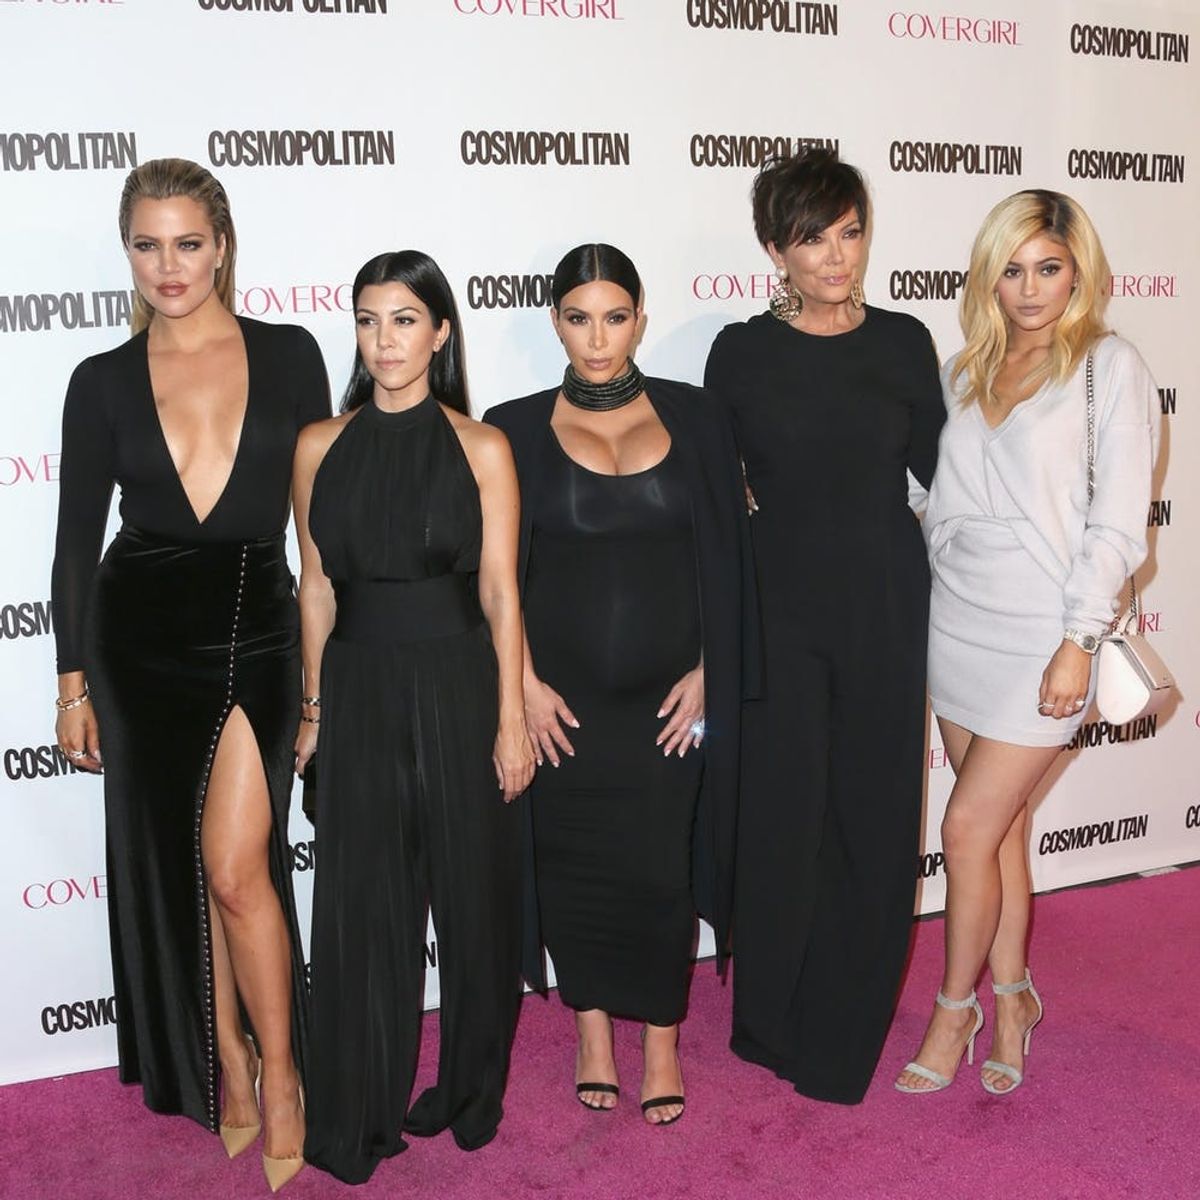 The Kardashian-Jenner Sisters Are Shutting Down Their Apps in 2019